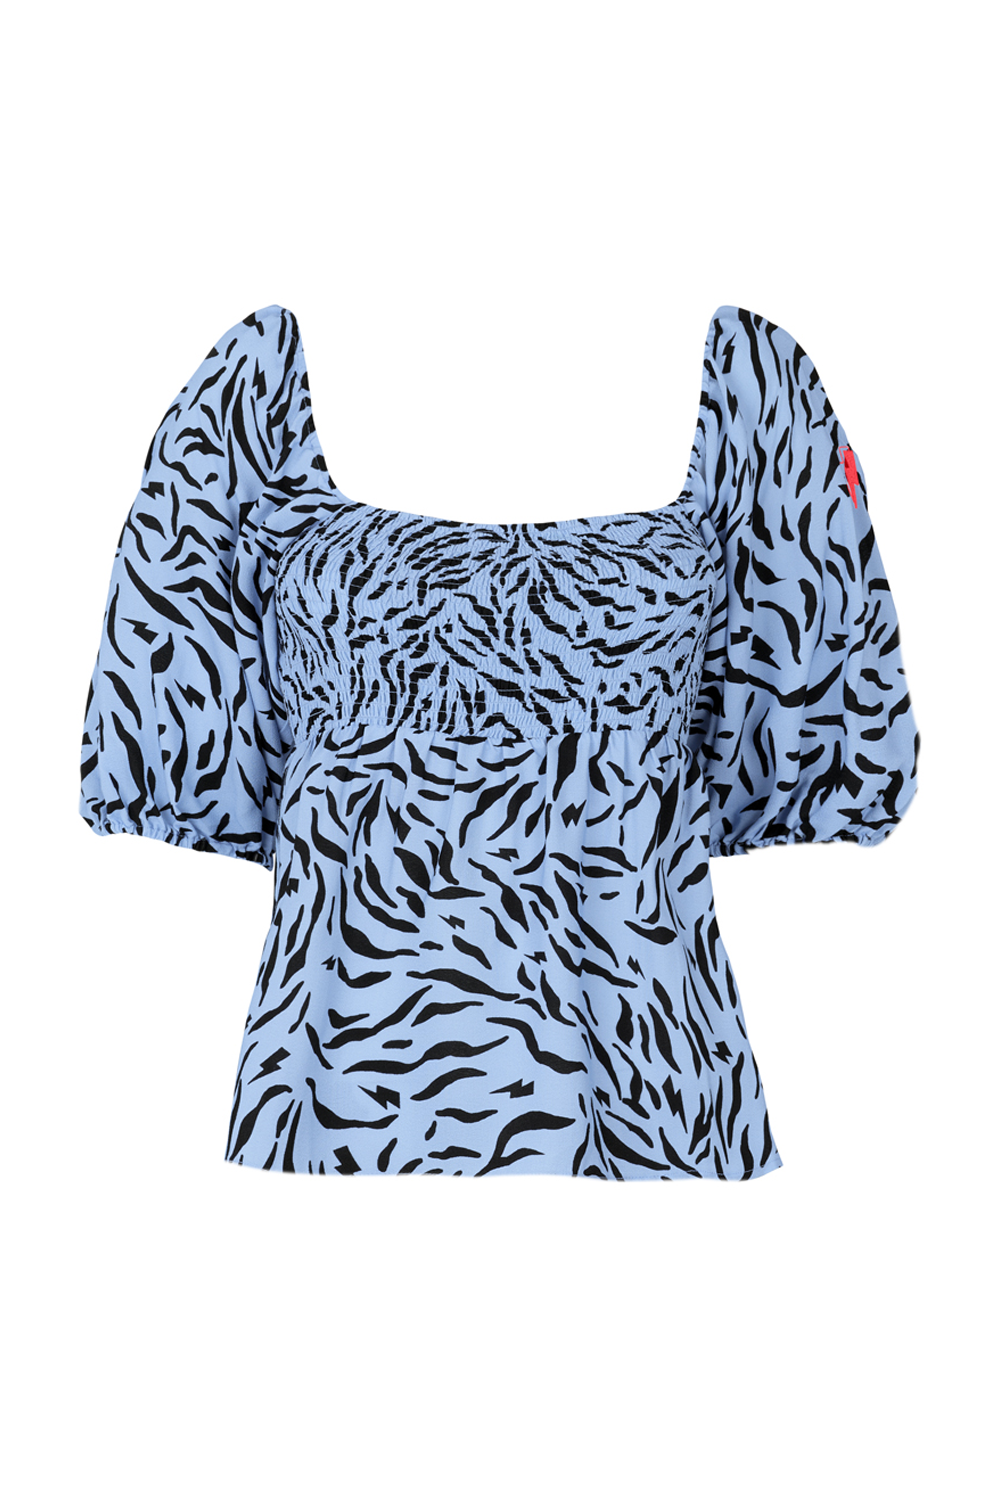 Pale Blue with Black Zebra Shirred Top